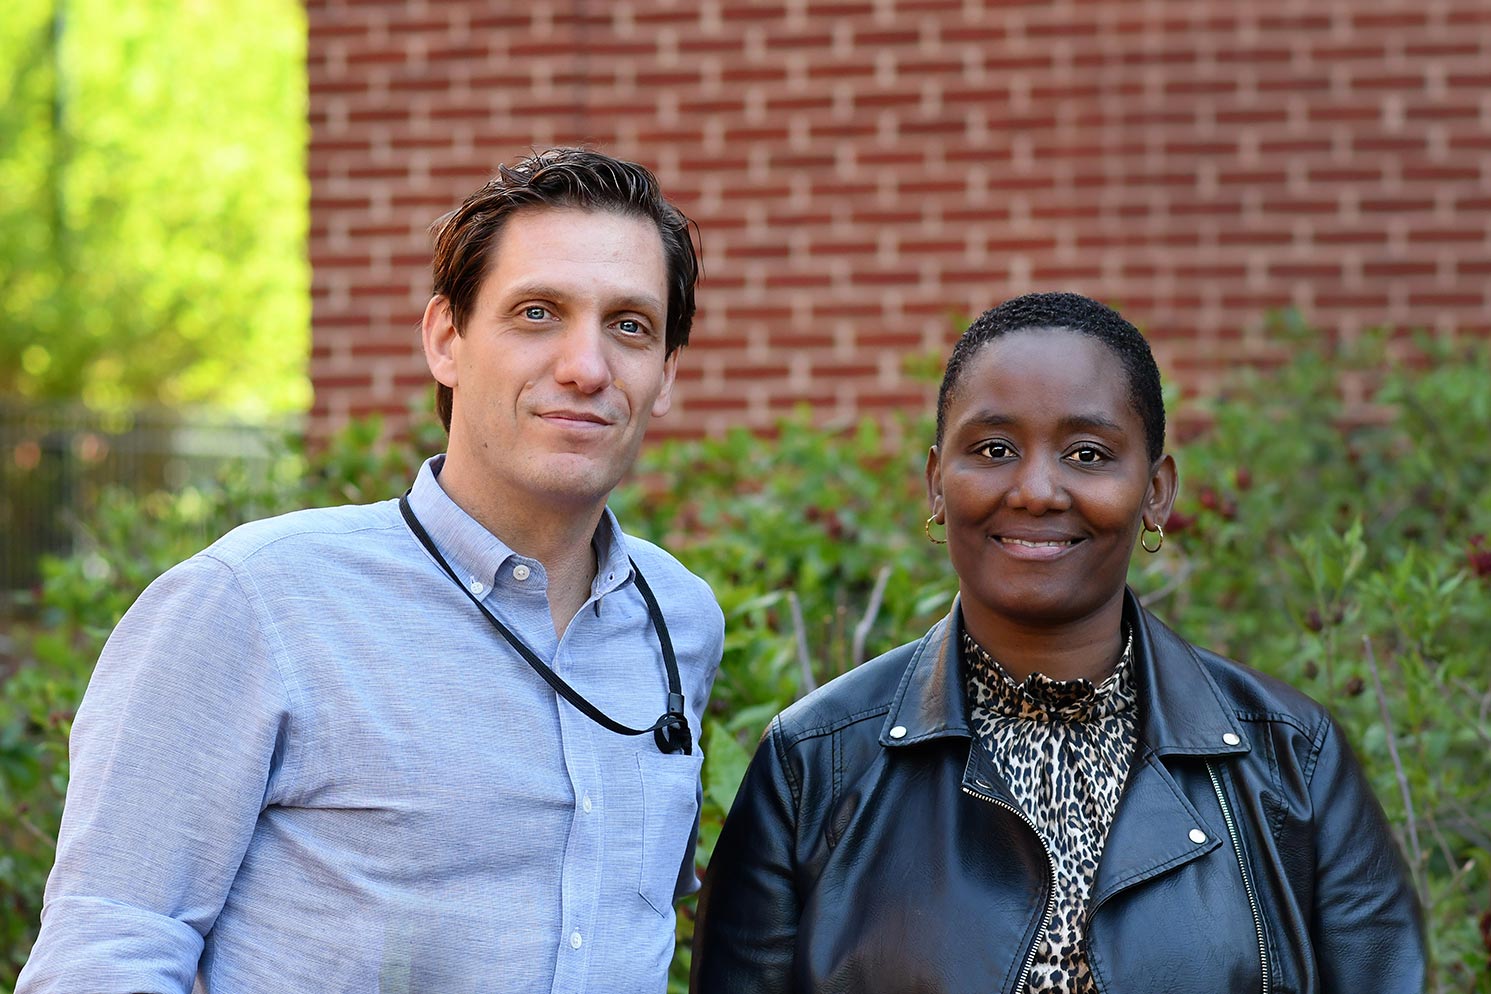 Scott Heysell and Stellah Mpagama pose for a portrait in front of a brick building